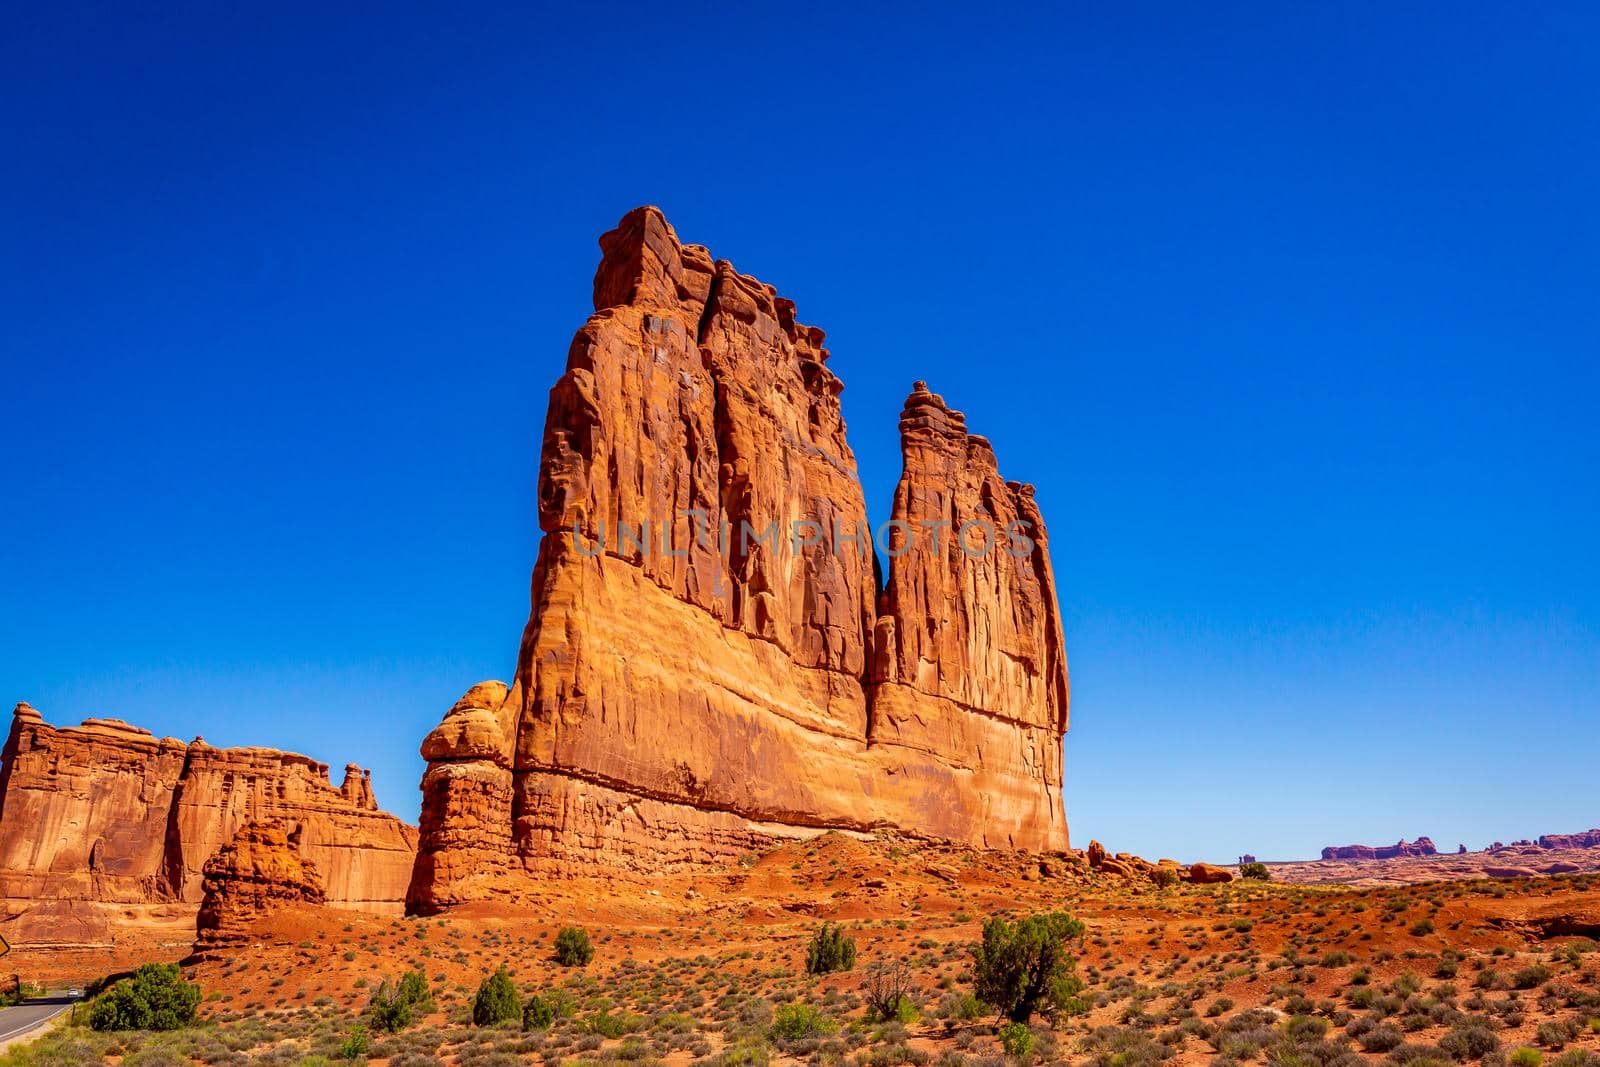 The Organ rock formation and Tower of Babel in Arches National Park, Utah